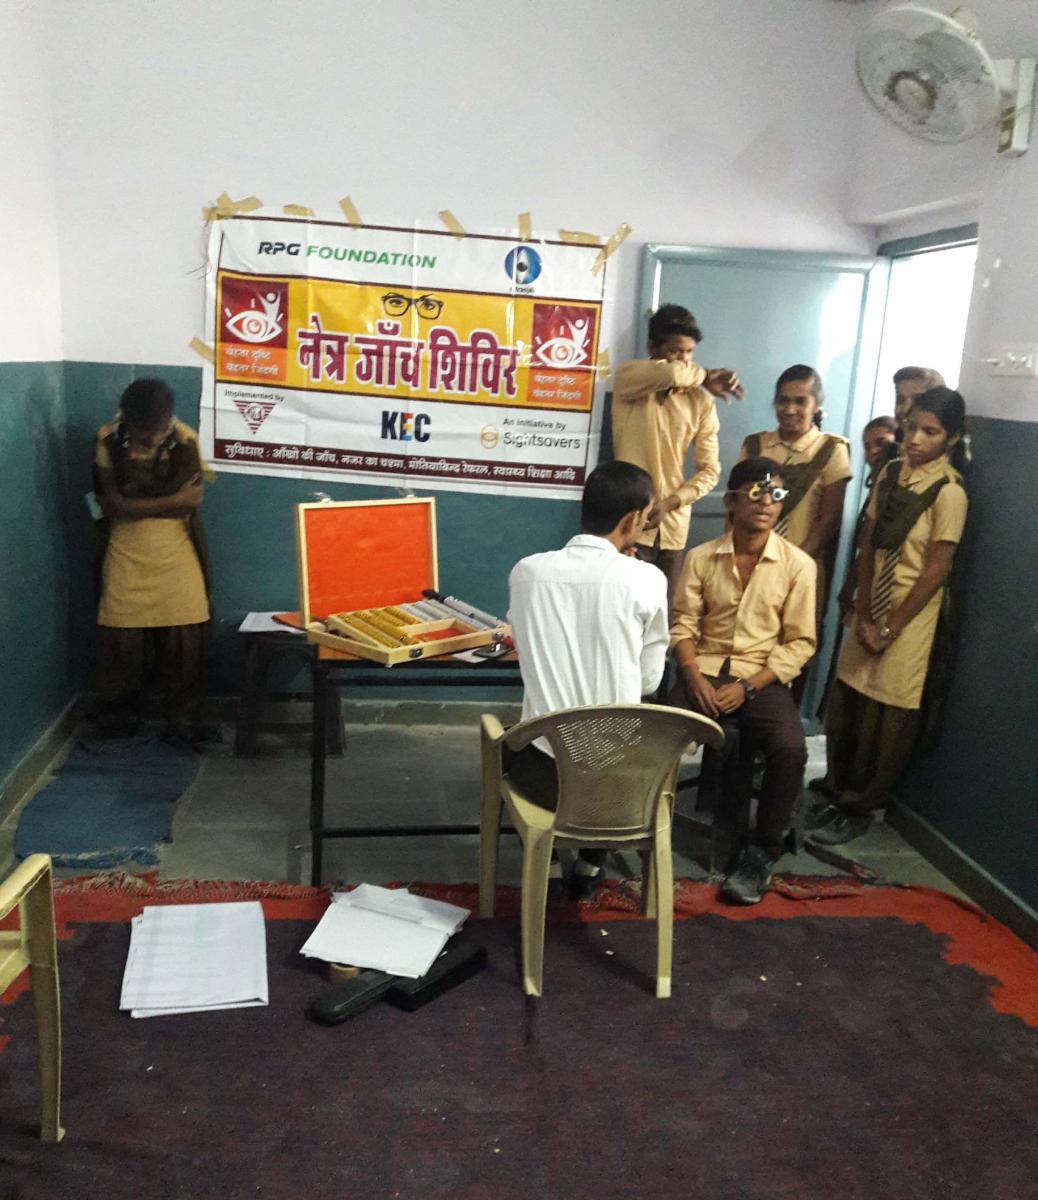 An eye screening camp was organized on 15.11.2017,  in joint collaboration of RPG Foundation, Bhoruka Charitable Trust and Sight Savers at Jagriti Govt Secondary school, Sushilpura – eye of 400 students were checked –power spectacles will also be given to the students after 3 days.